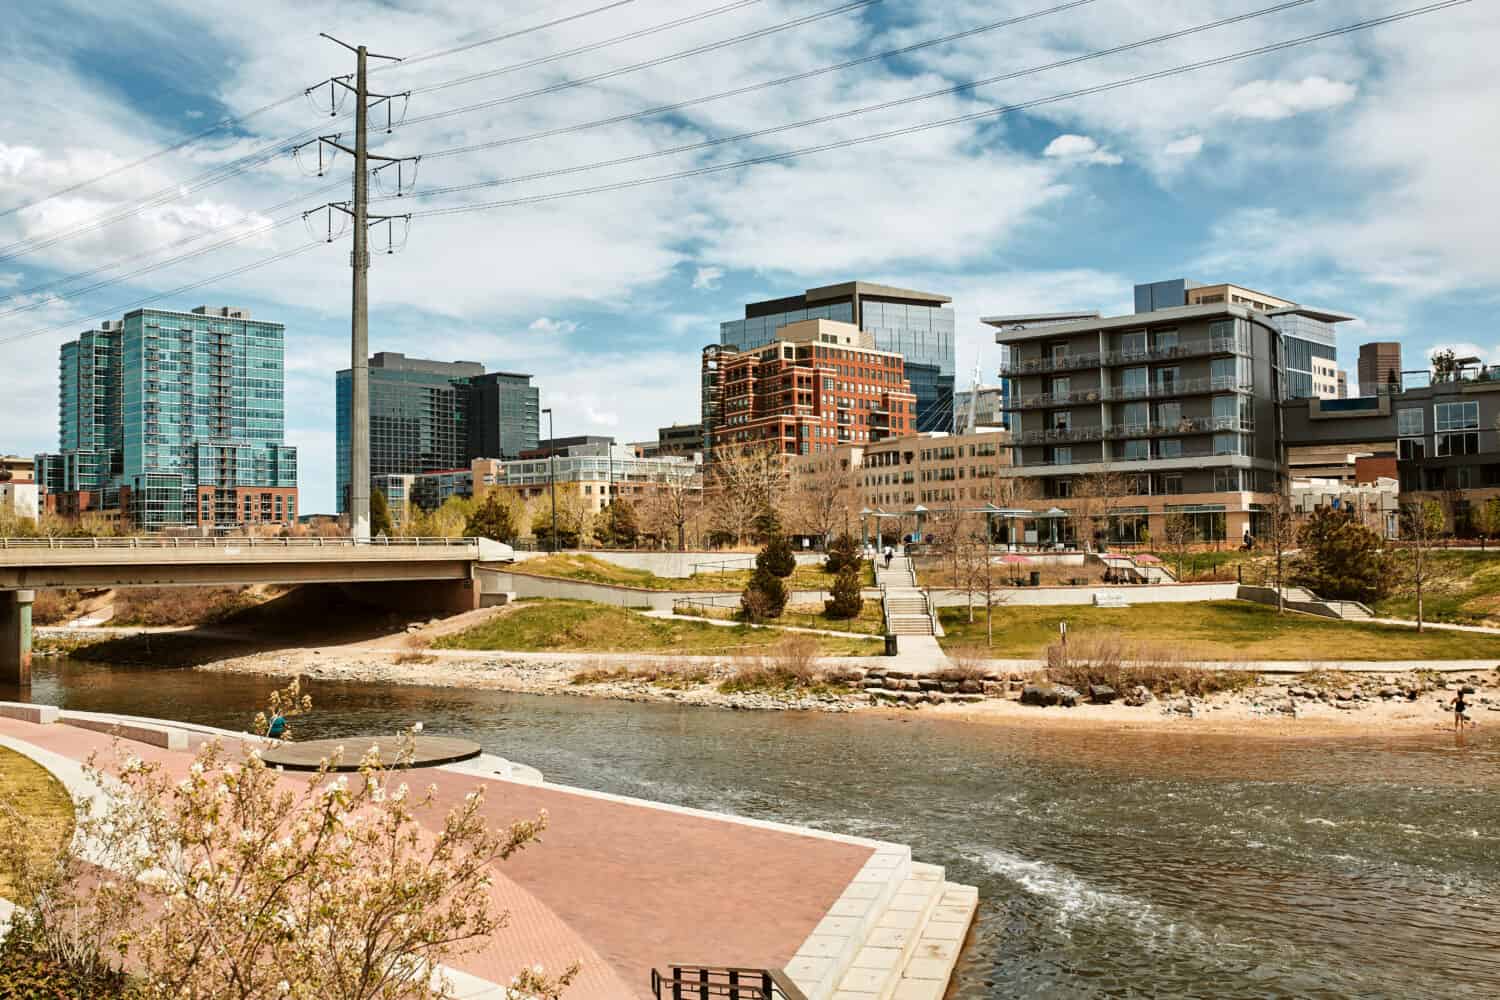 South Platte River surrounded by apartments and office buildings at Shoemaker Plaza in Confluence Park. Denver, Colorado